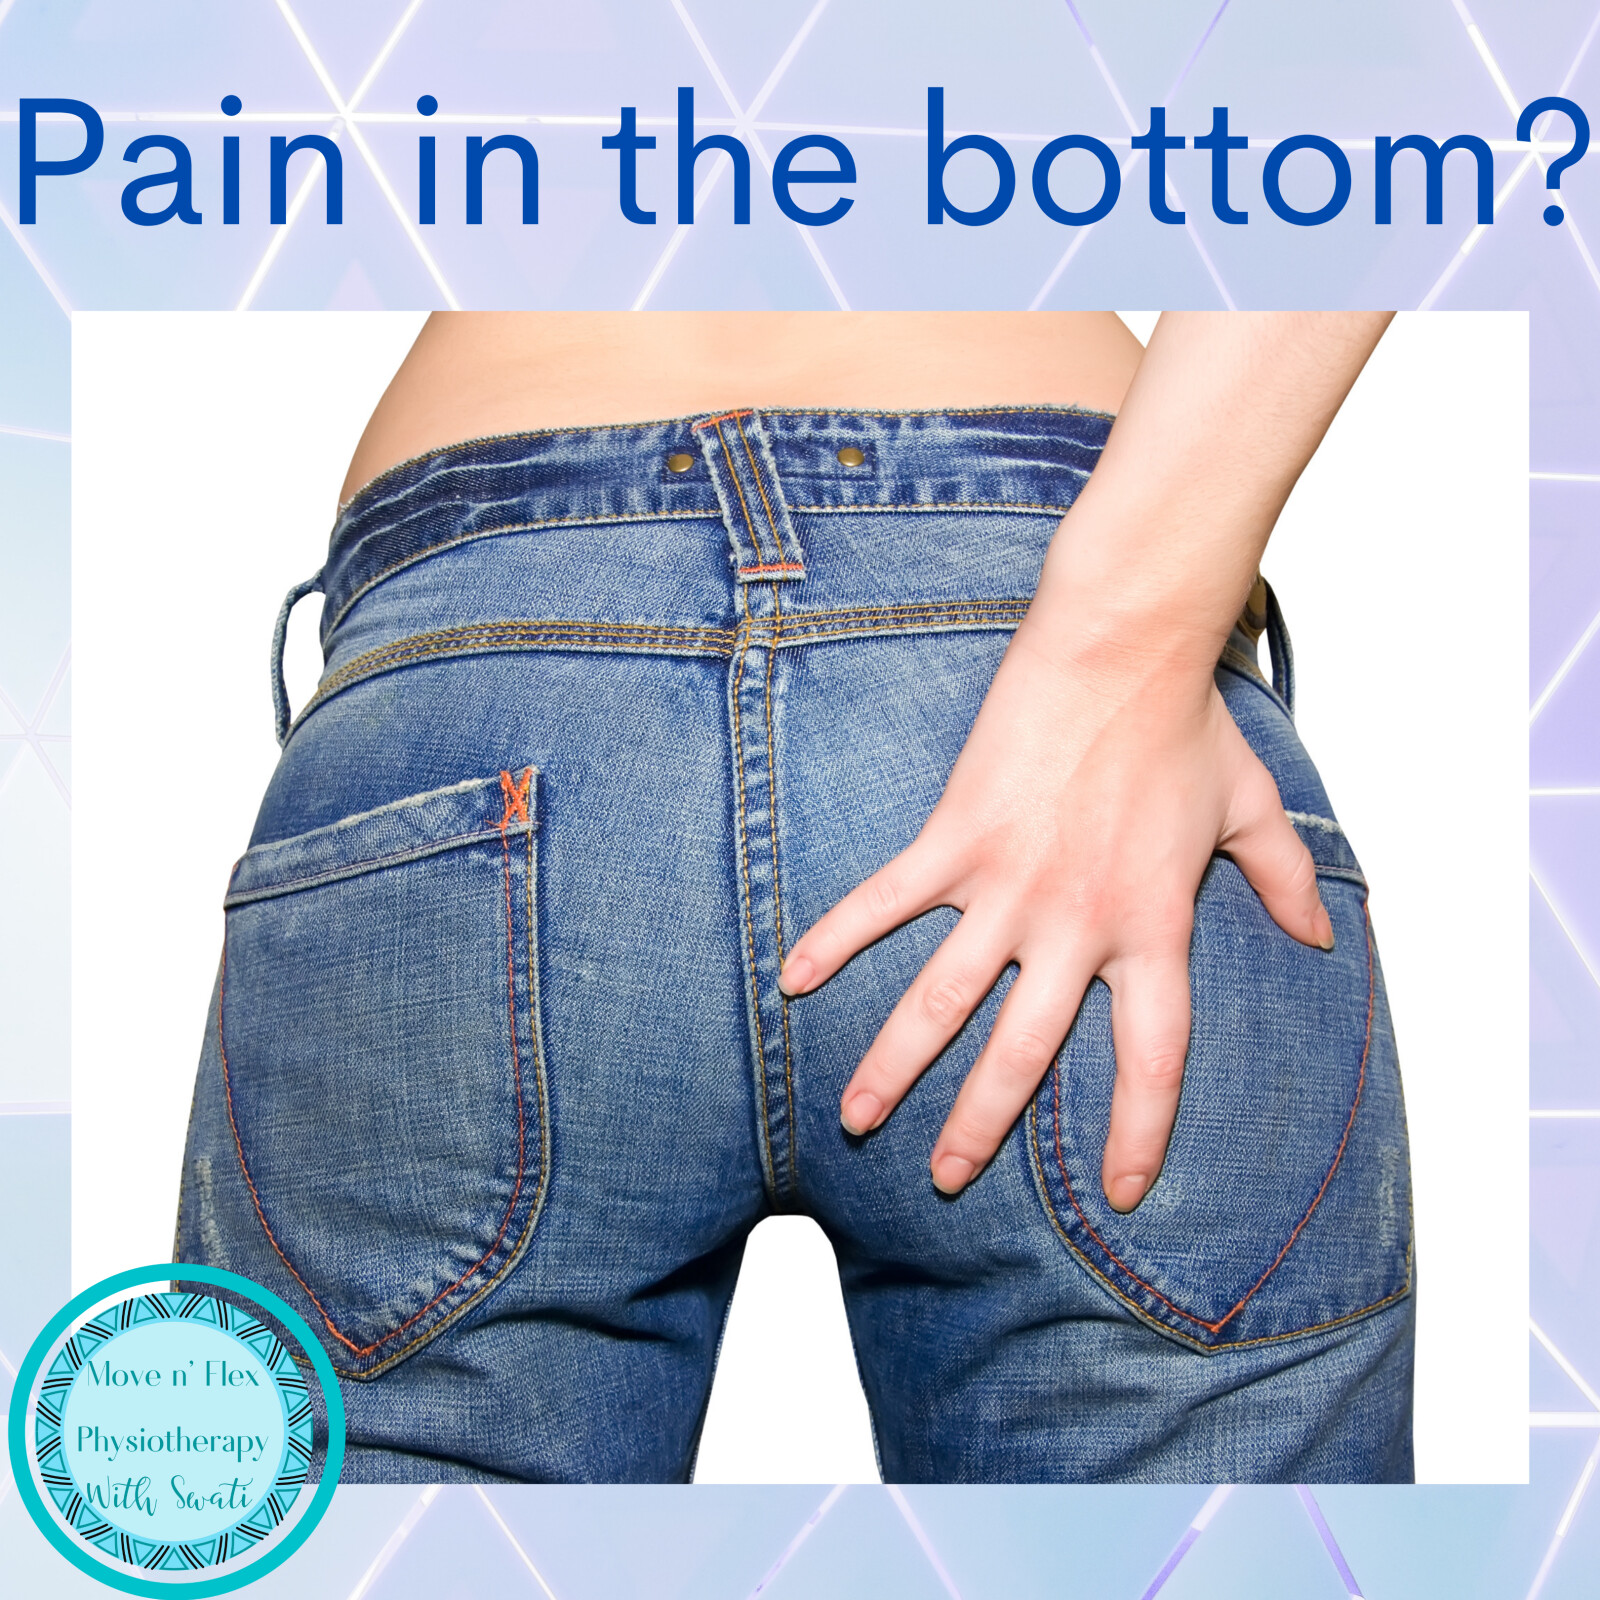 Is your bottom pain caused by Piriformis Syndrome or Sciatica?